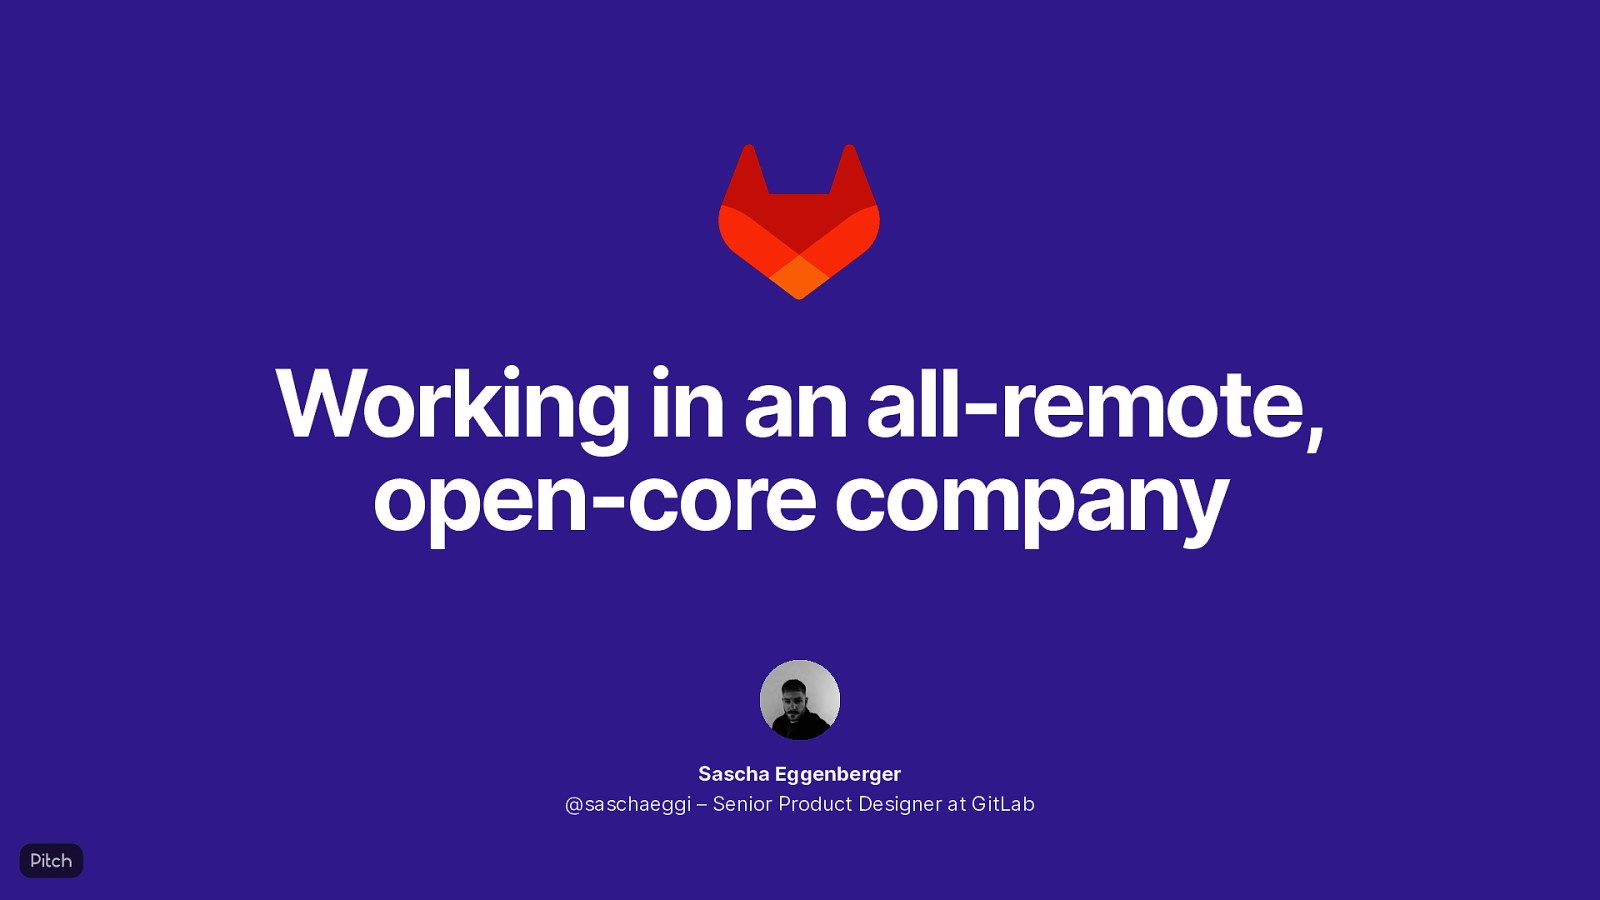 Working in an all-remote, open-core company